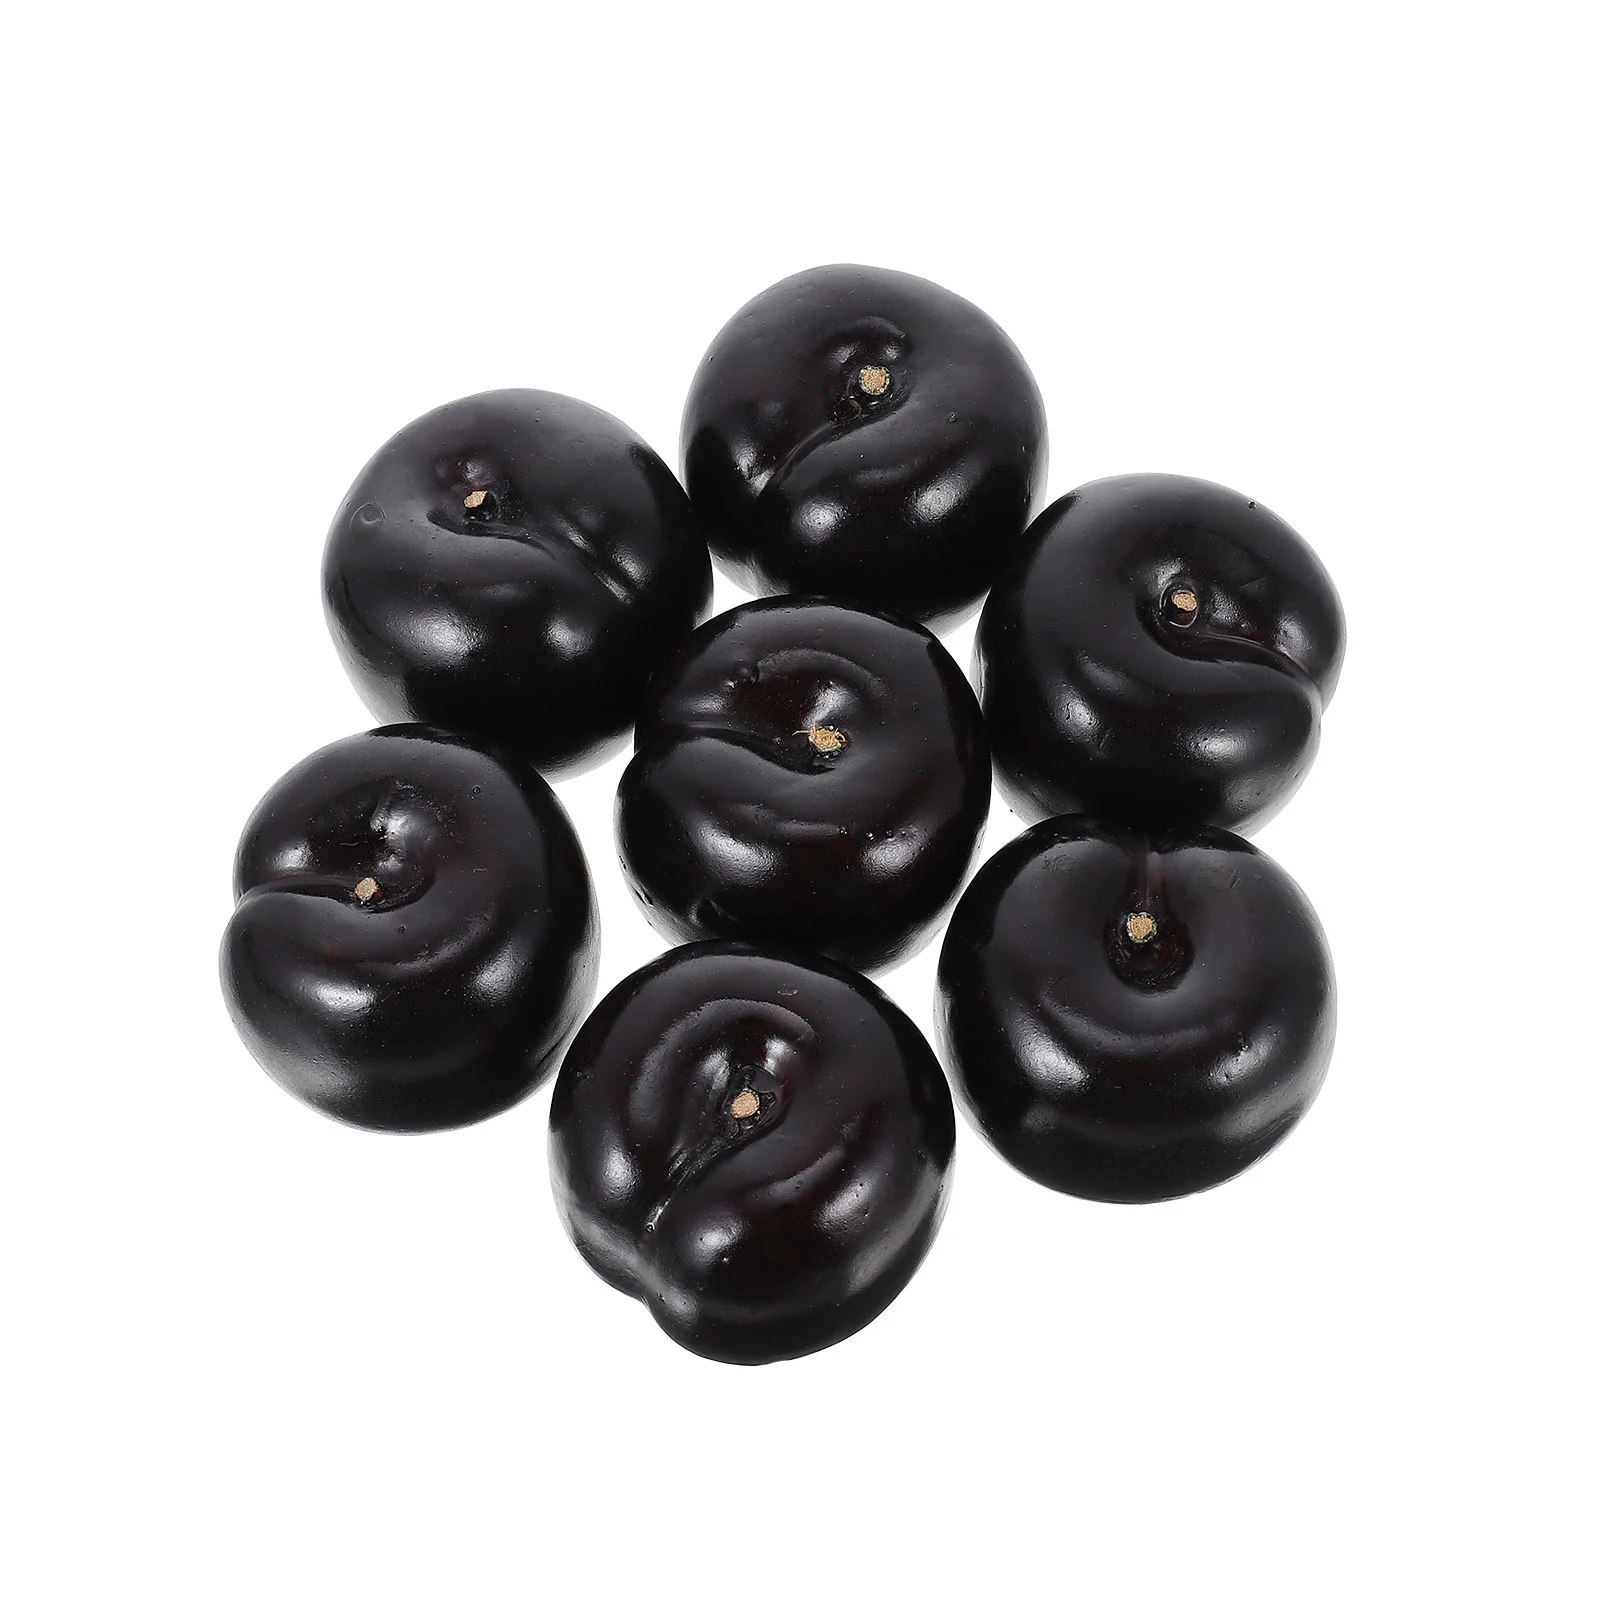 

8 Pcs Water Table Toys Simulated Black Blin Fake Foams Fruits Simulation Plum Party Ornament Model 6.5X5.5CM High Density Child